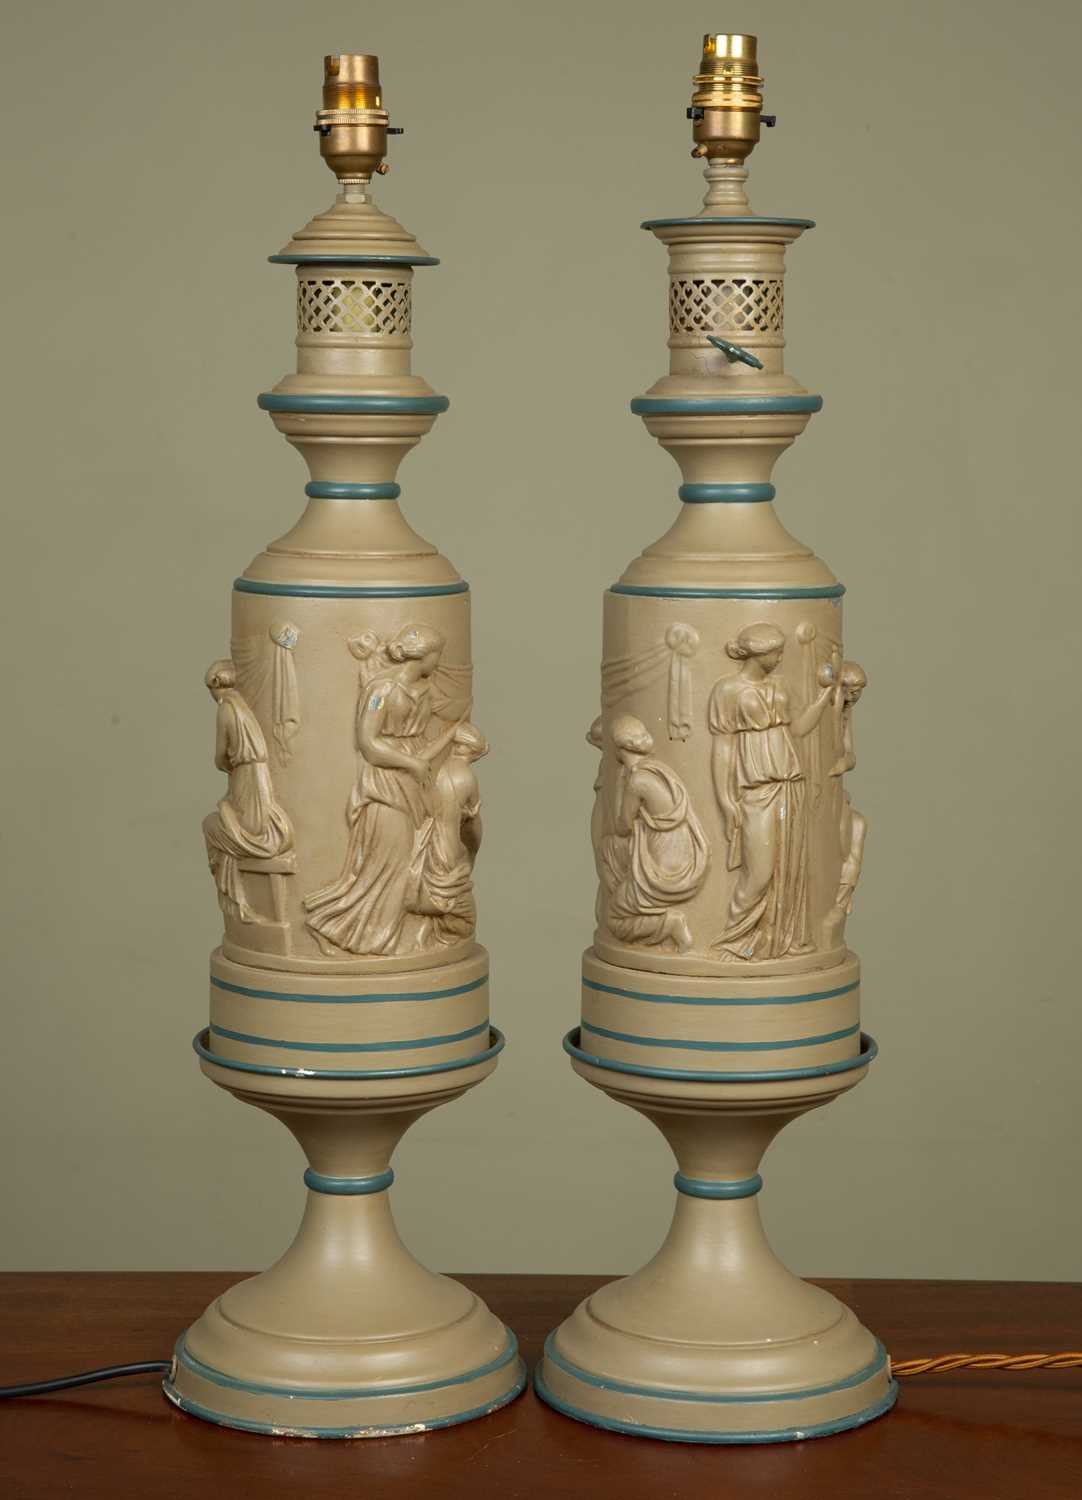 Lot 500 - A pair of Greek style lamp stands